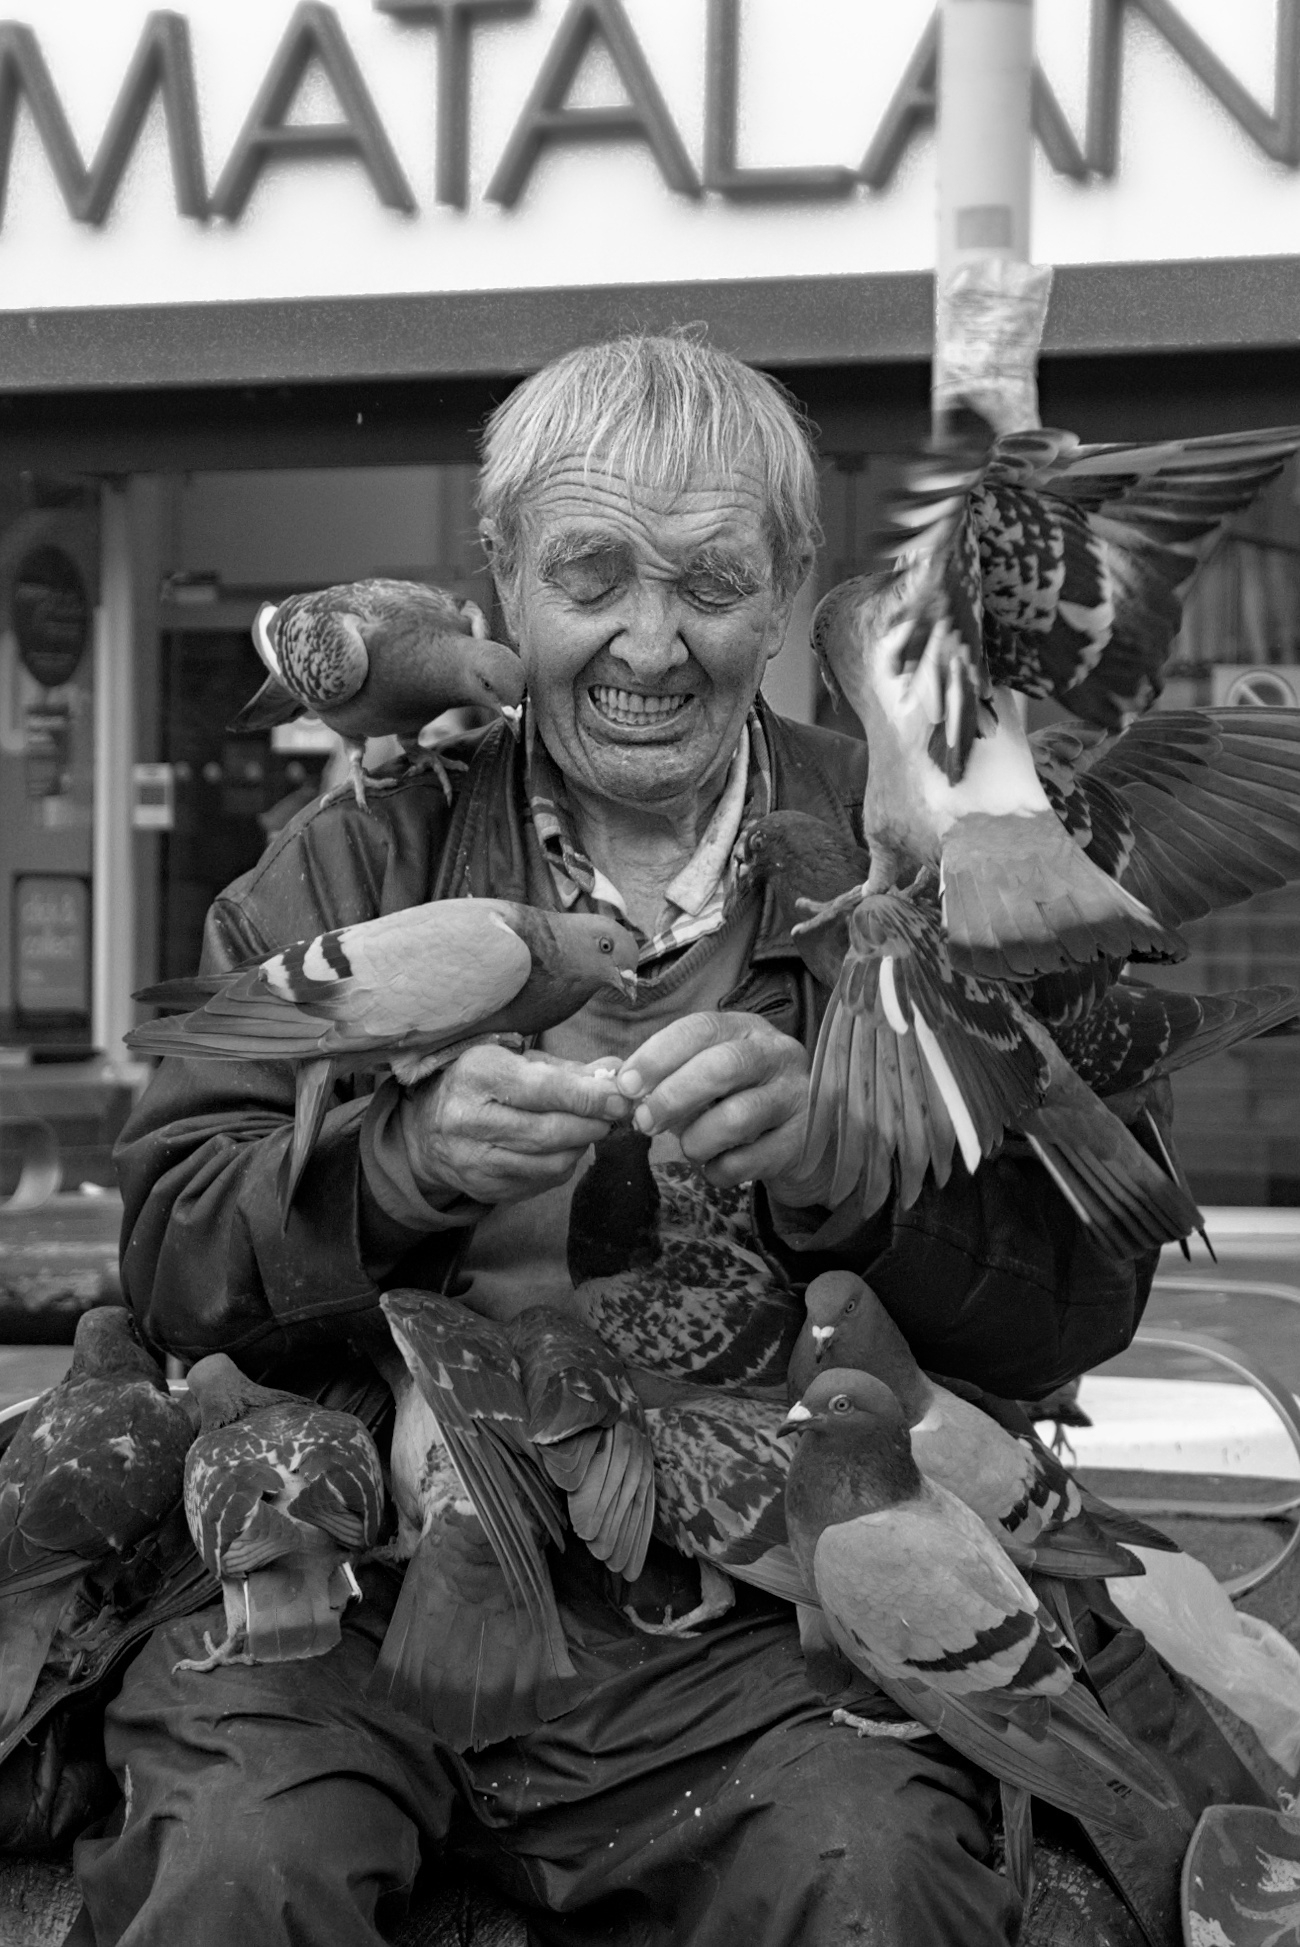 Black and white photo, portrait view of a man sitting outside a shop feeding pigeons, with many pigeons sitting and climbing all over him